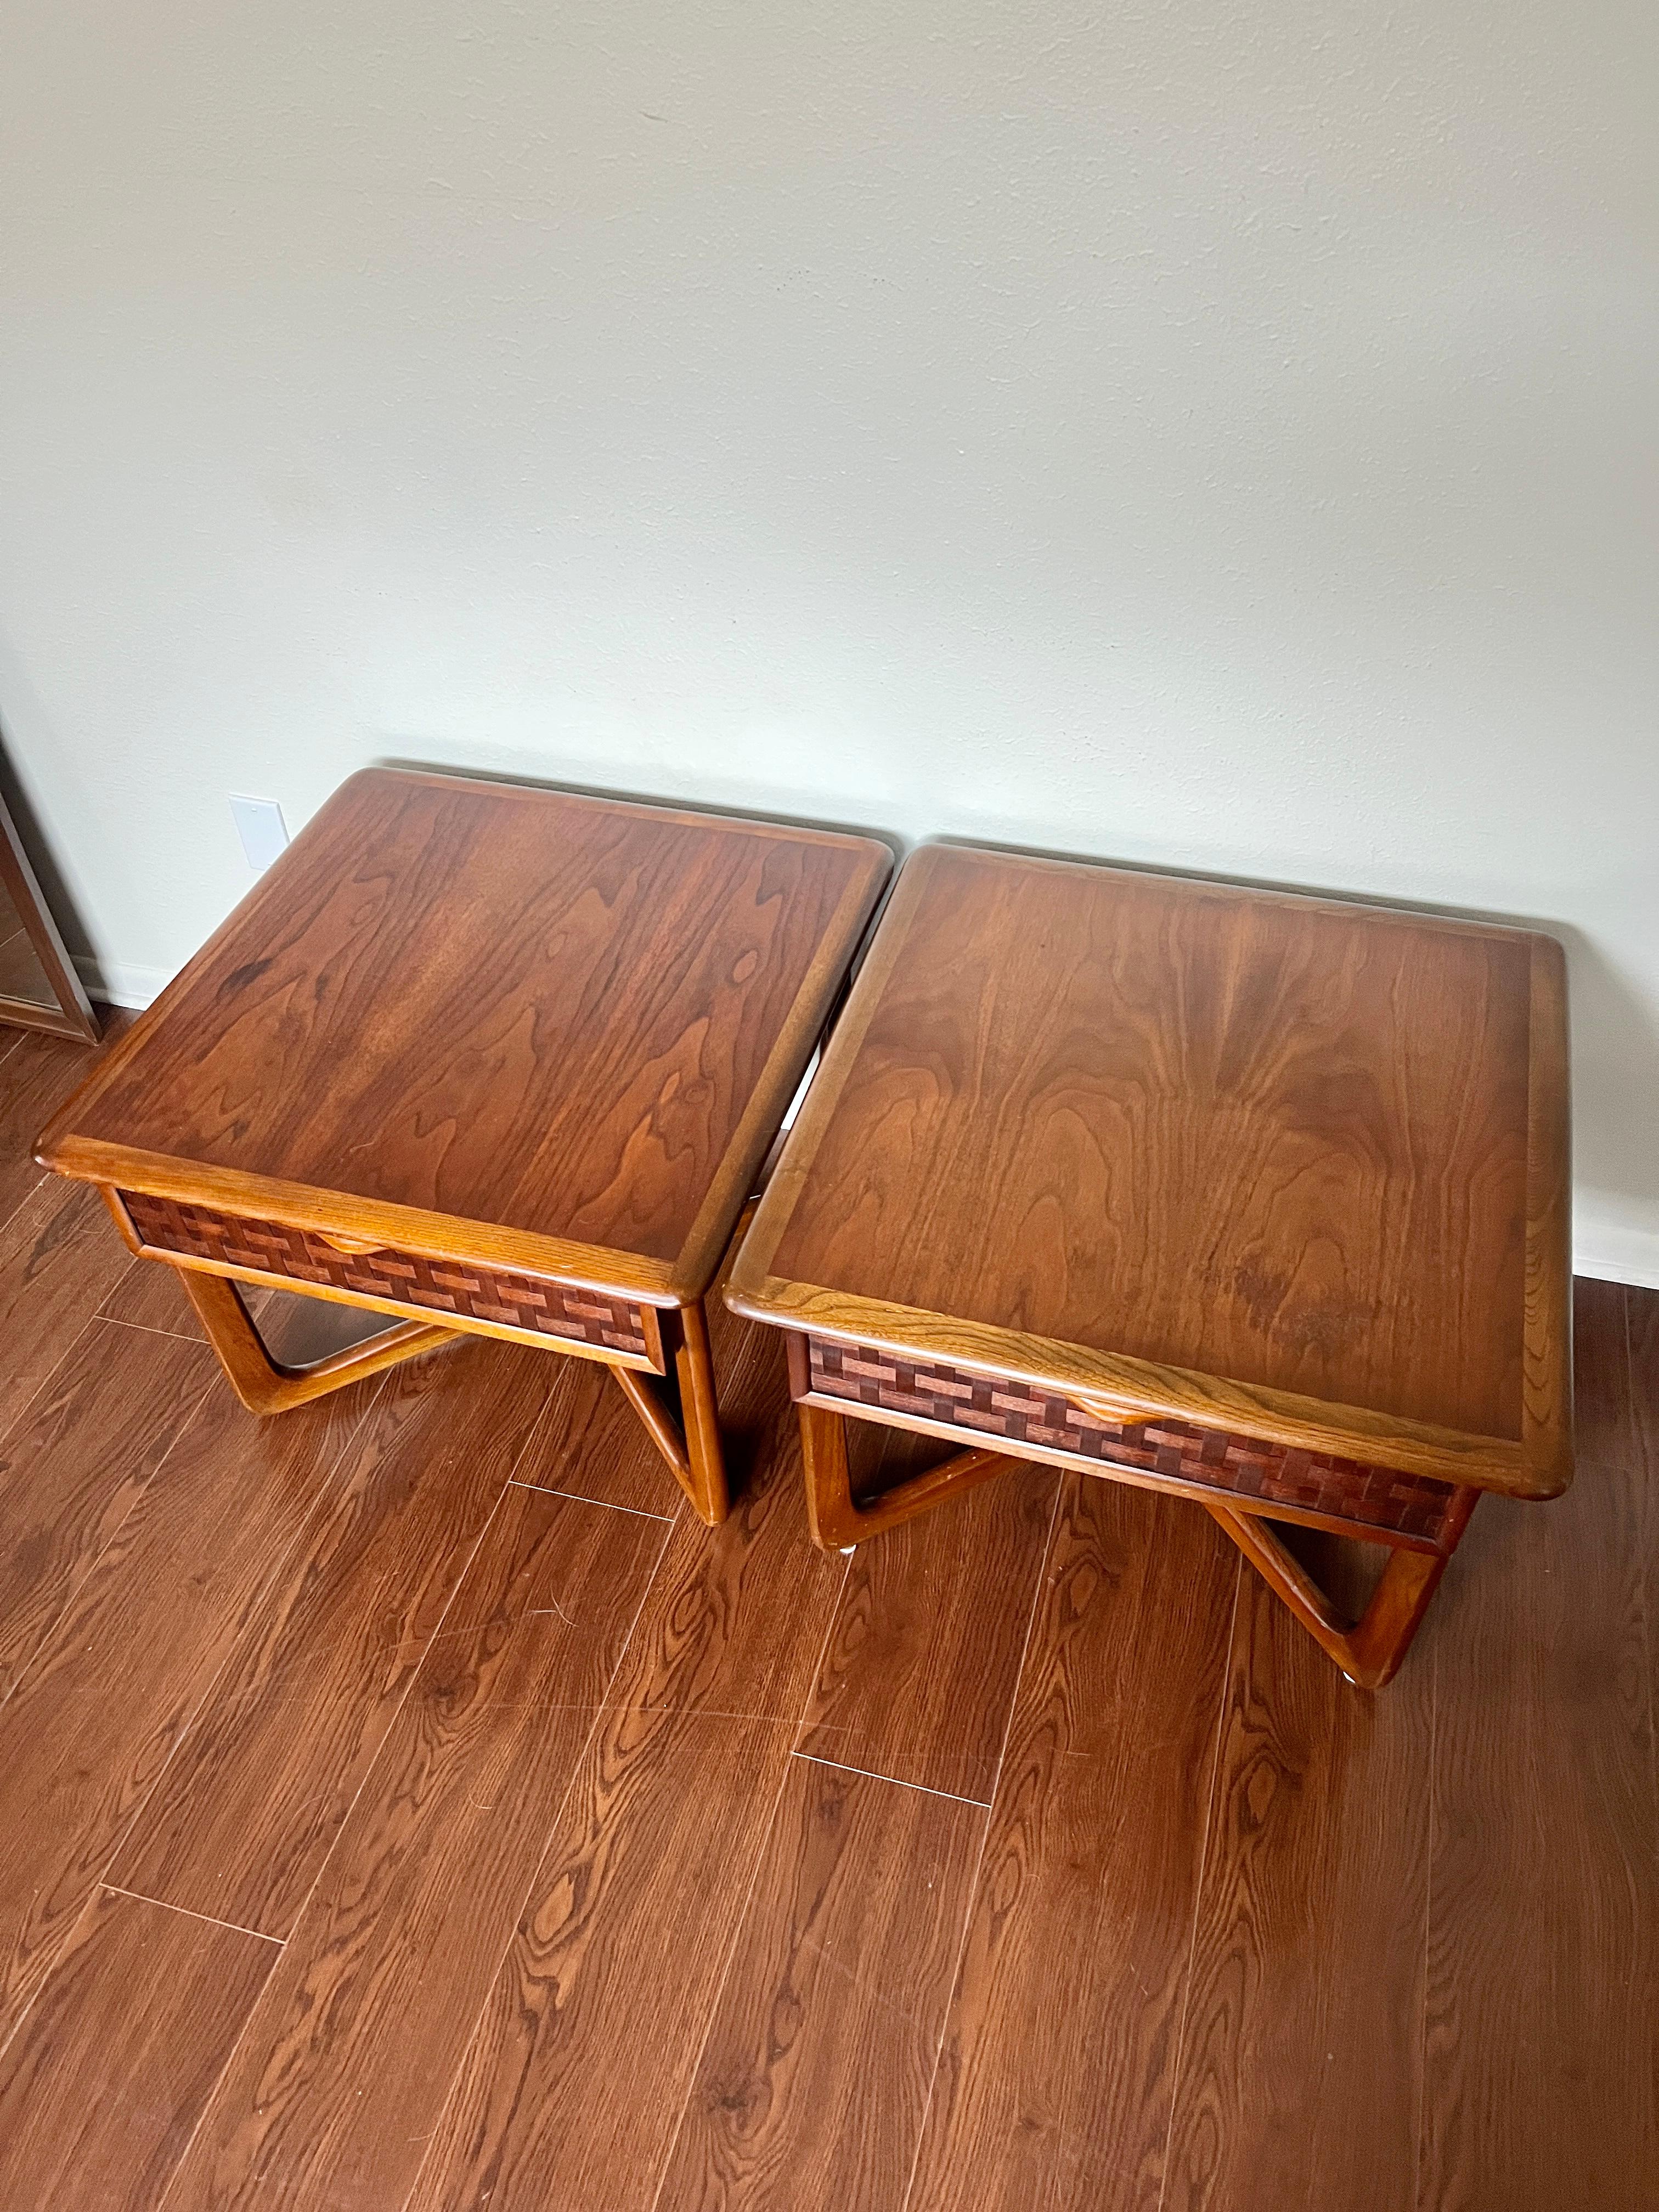 Pair of Mid-Century Modern Lane Perception Side Tables with a Cross Cross Base 6